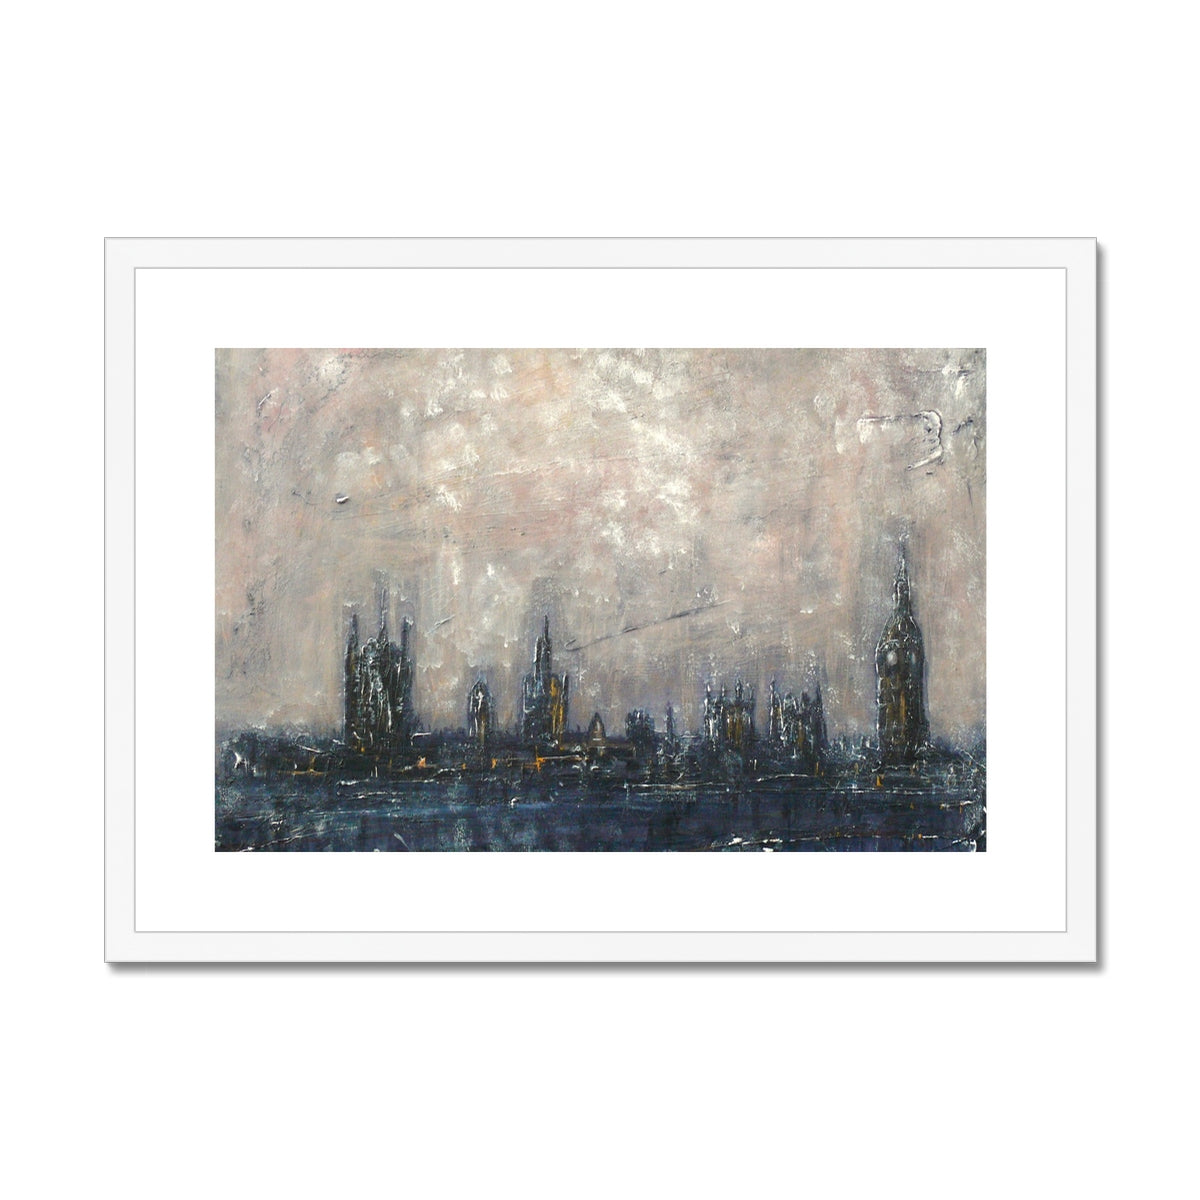 Winter In London Painting | Framed & Mounted Prints From Scotland-Framed & Mounted Prints-World Art Gallery-A2 Landscape-White Frame-Paintings, Prints, Homeware, Art Gifts From Scotland By Scottish Artist Kevin Hunter